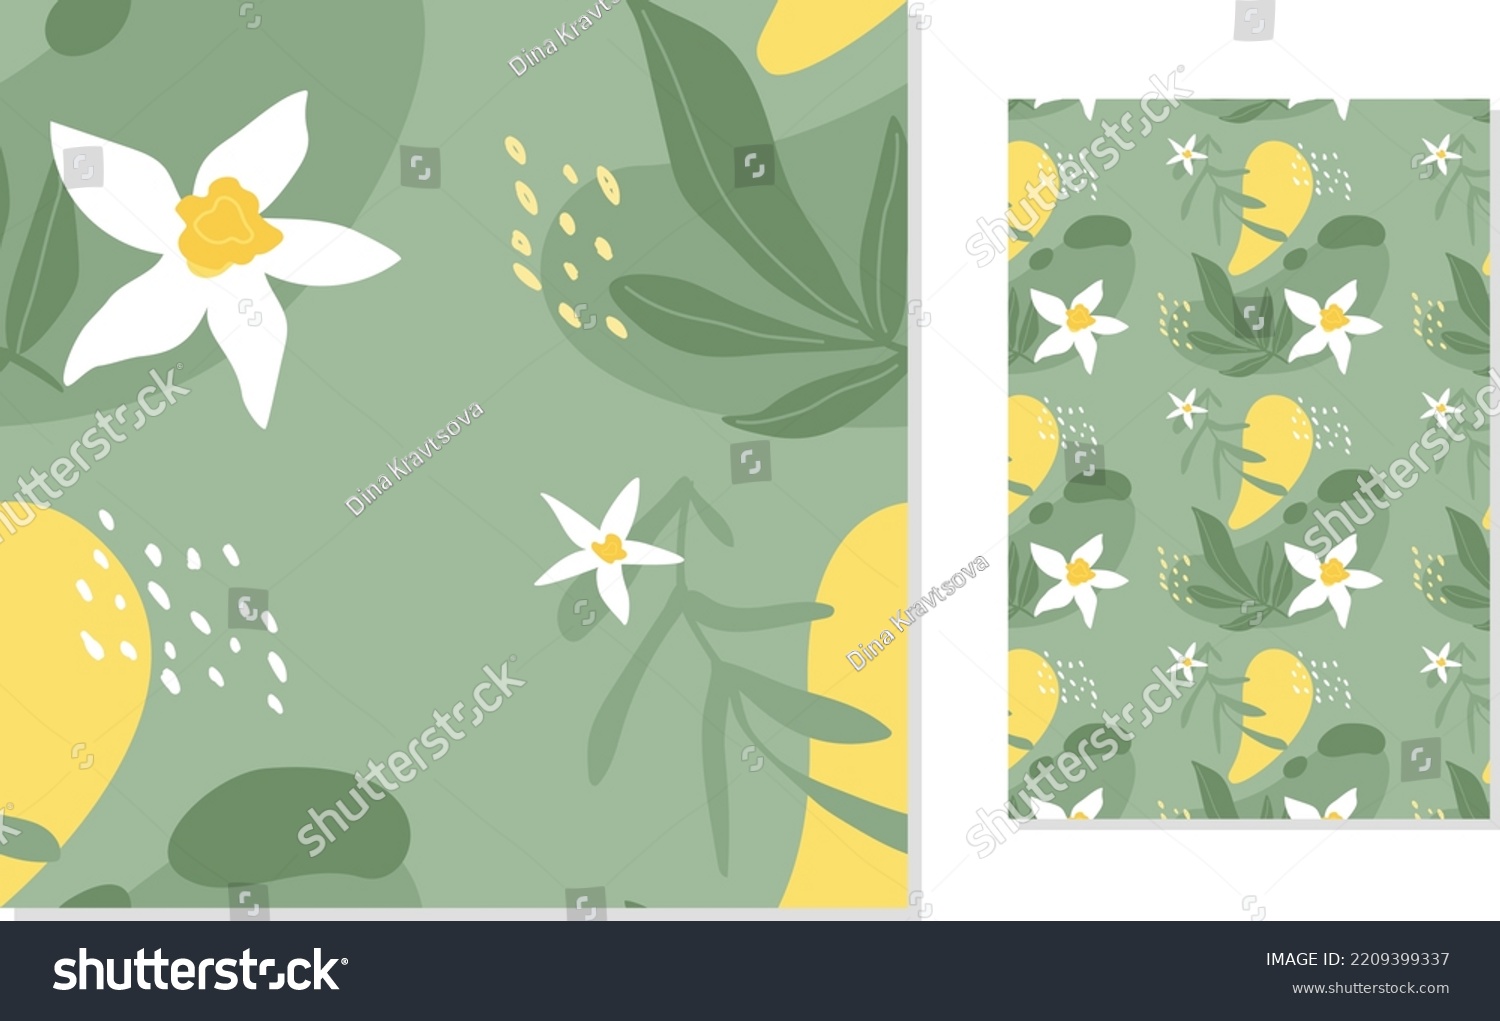 SVG of Vector seamless floral pattern. Hand drawn daffodils and abstract shapes. Flat style pattern for wallpapers, textile, prints etc. svg